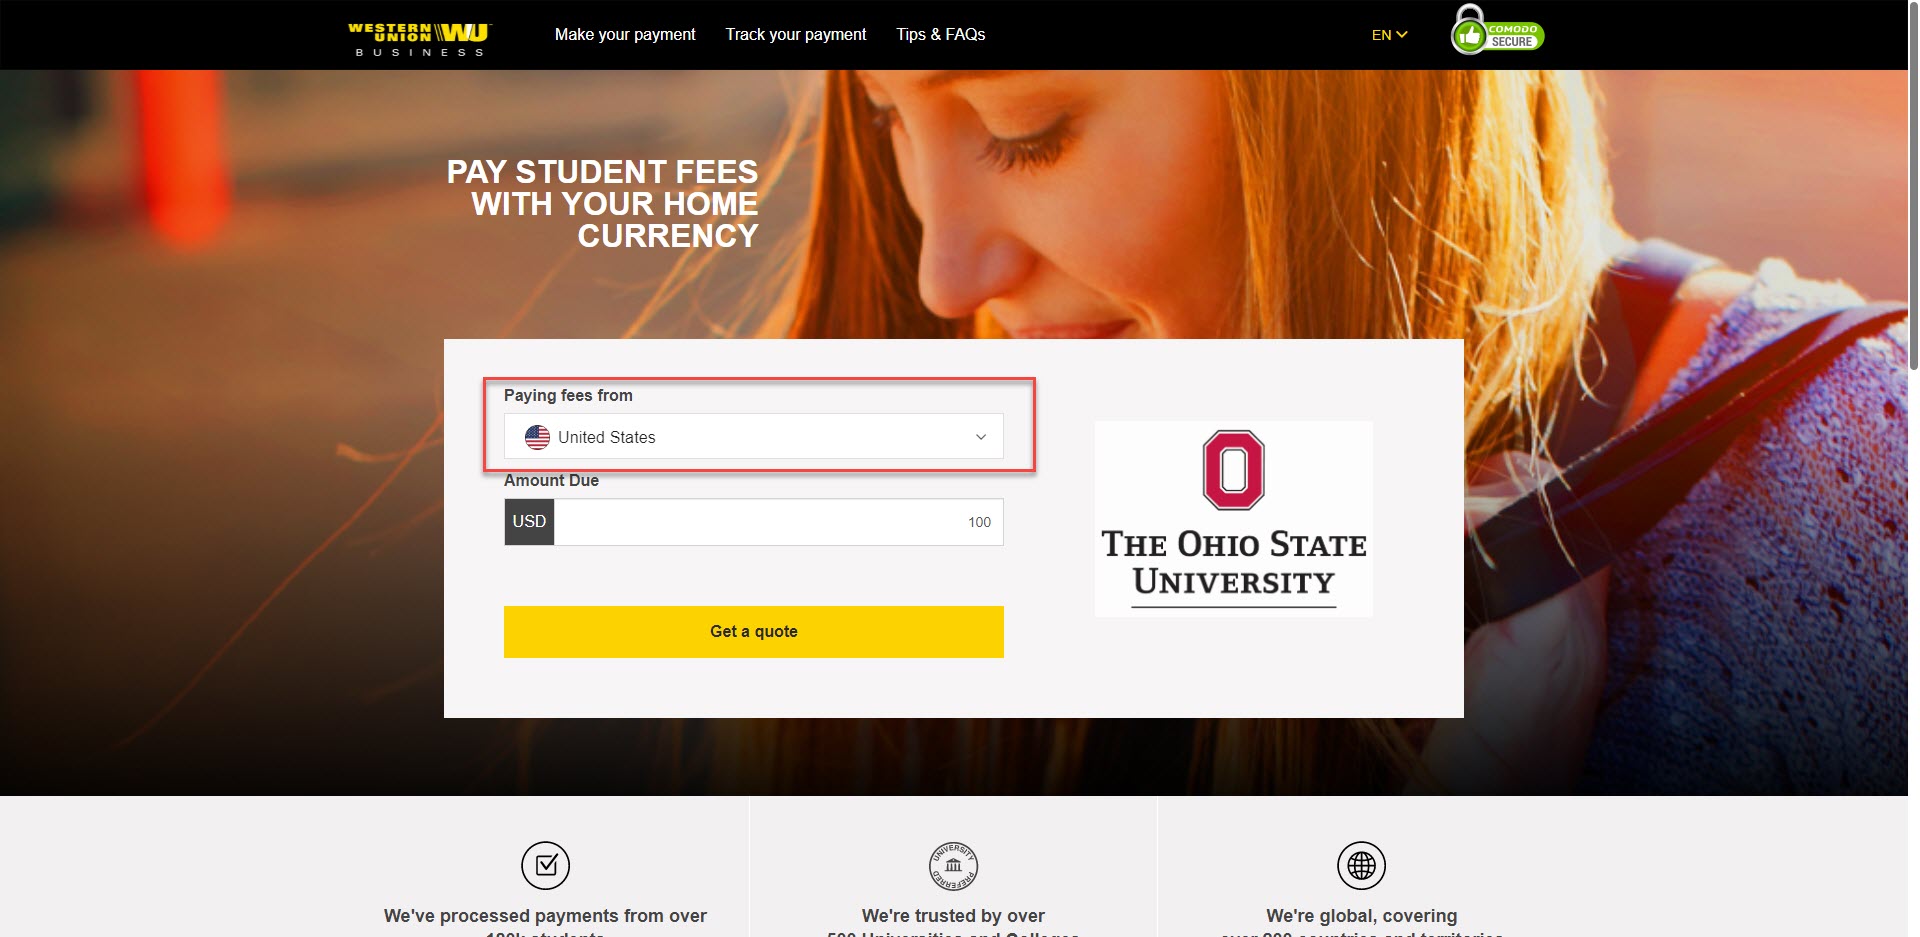 The Ohio State University Western Union Payment portal. The payment portal contains a drop-down menu for paying fees from a selection of companies and Amount Due field to enter the amount and a Get a quote button.